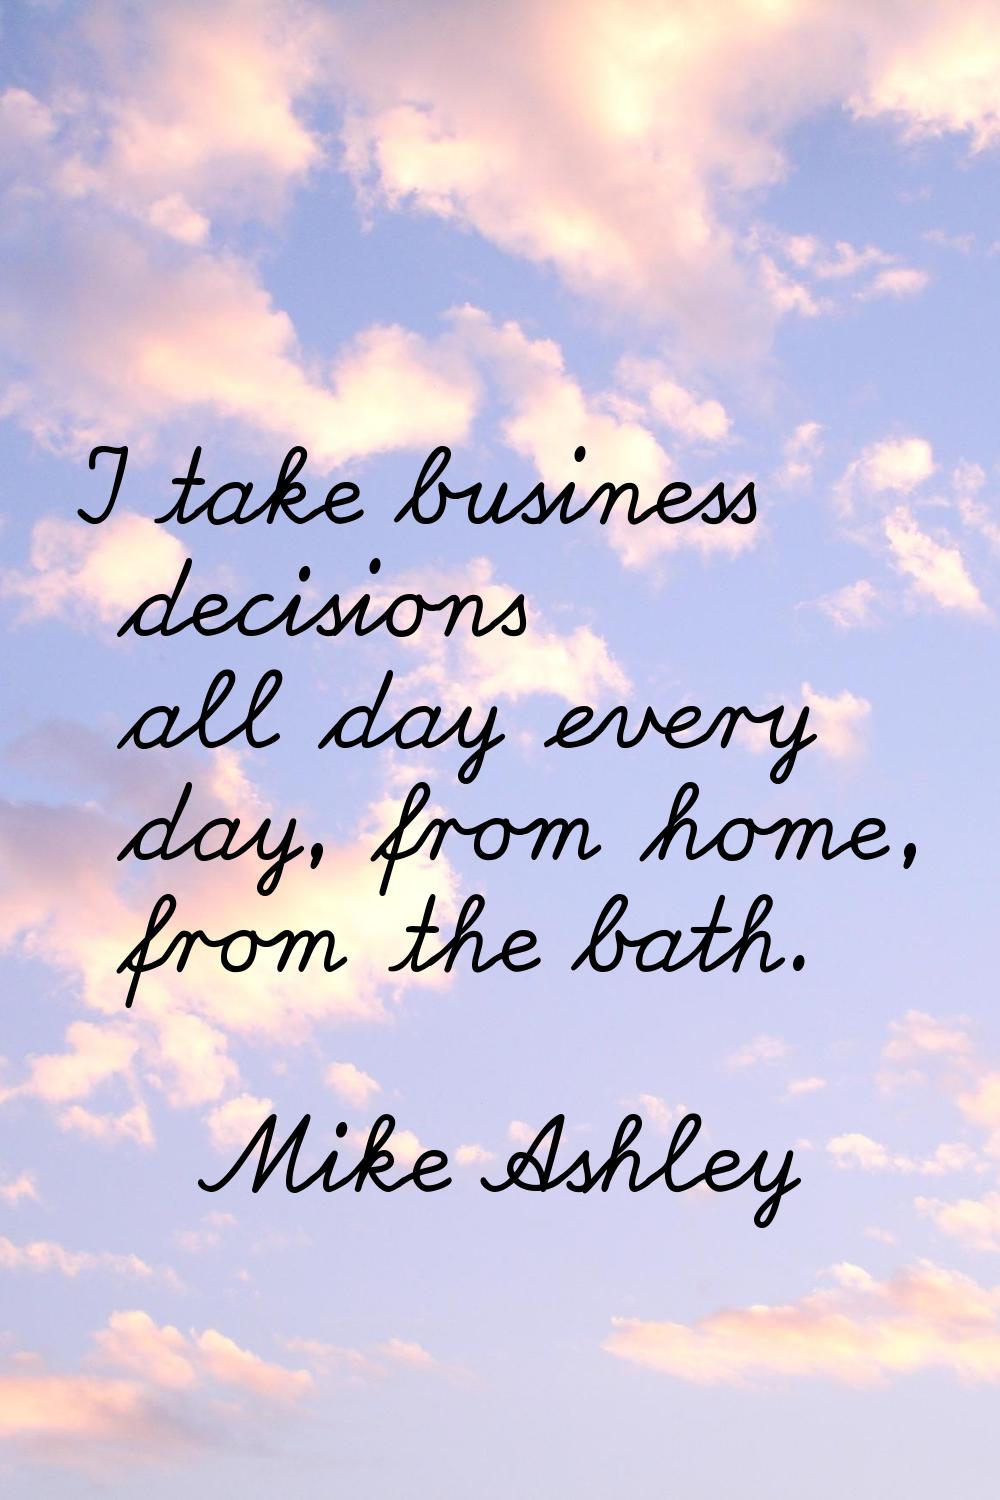 I take business decisions all day every day, from home, from the bath.